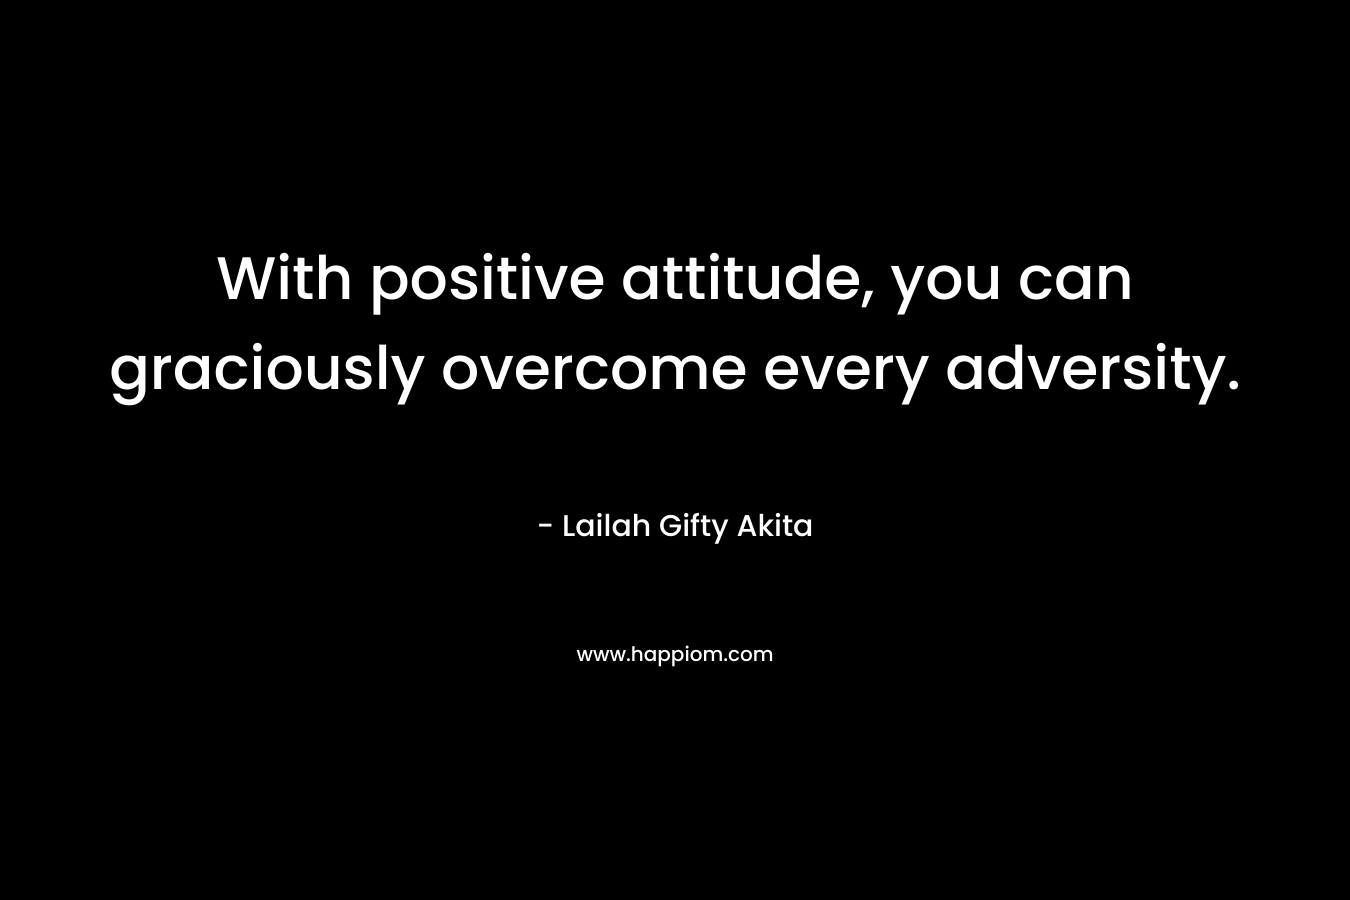 With positive attitude, you can graciously overcome every adversity.